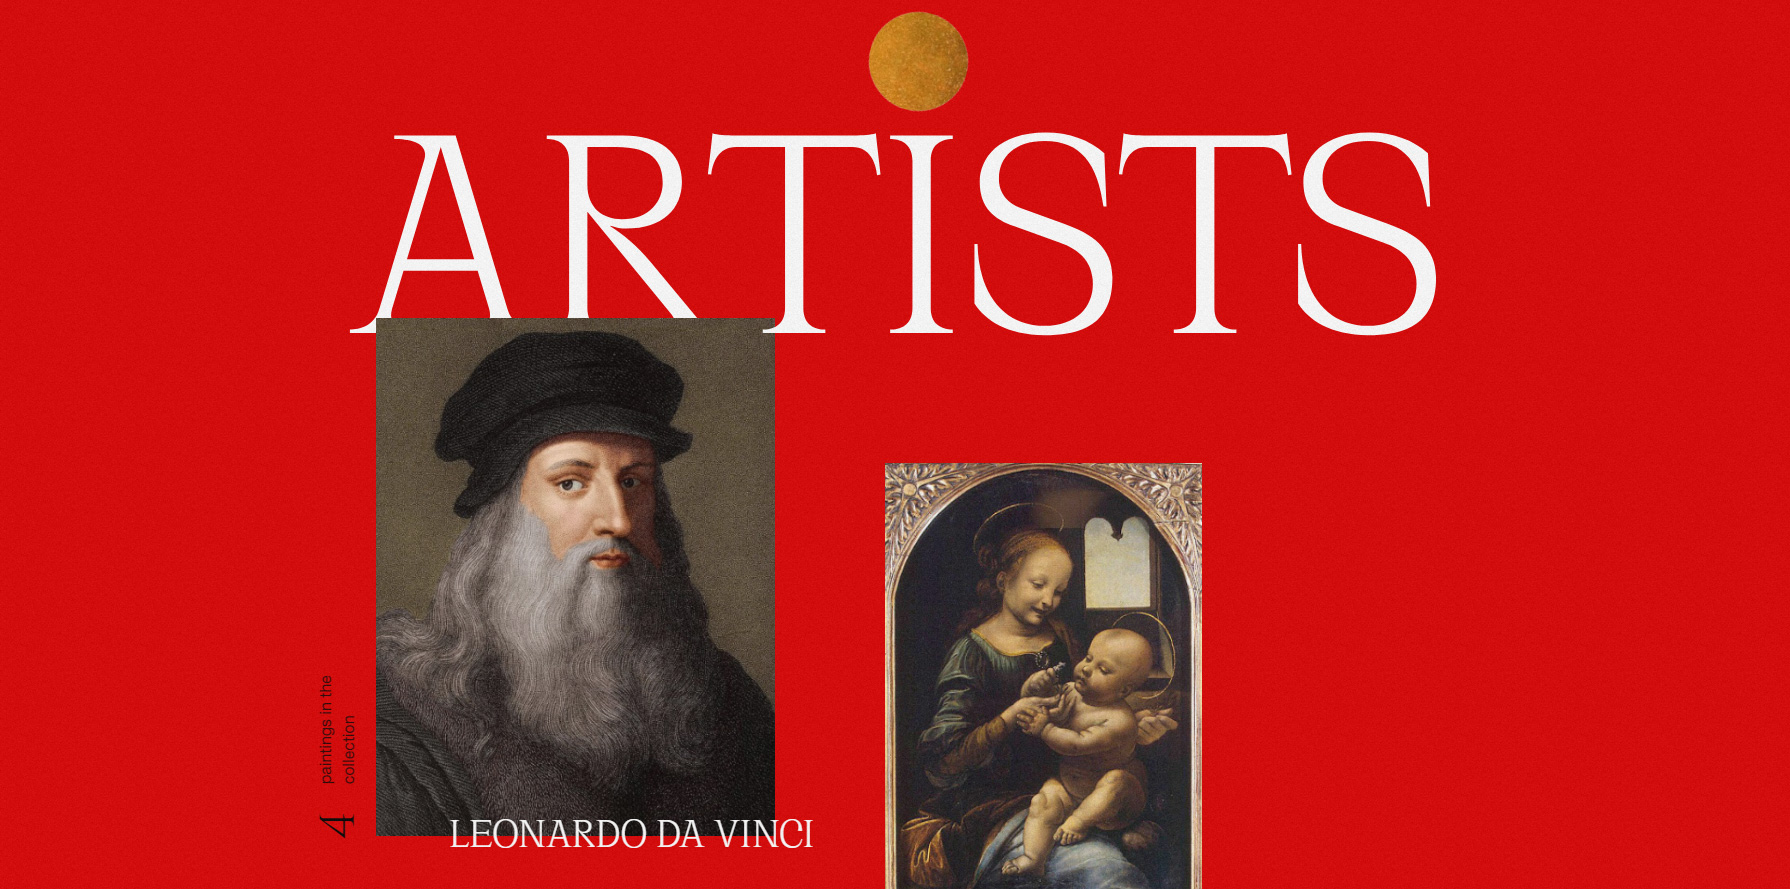 Private Art Collection - Website of the Day